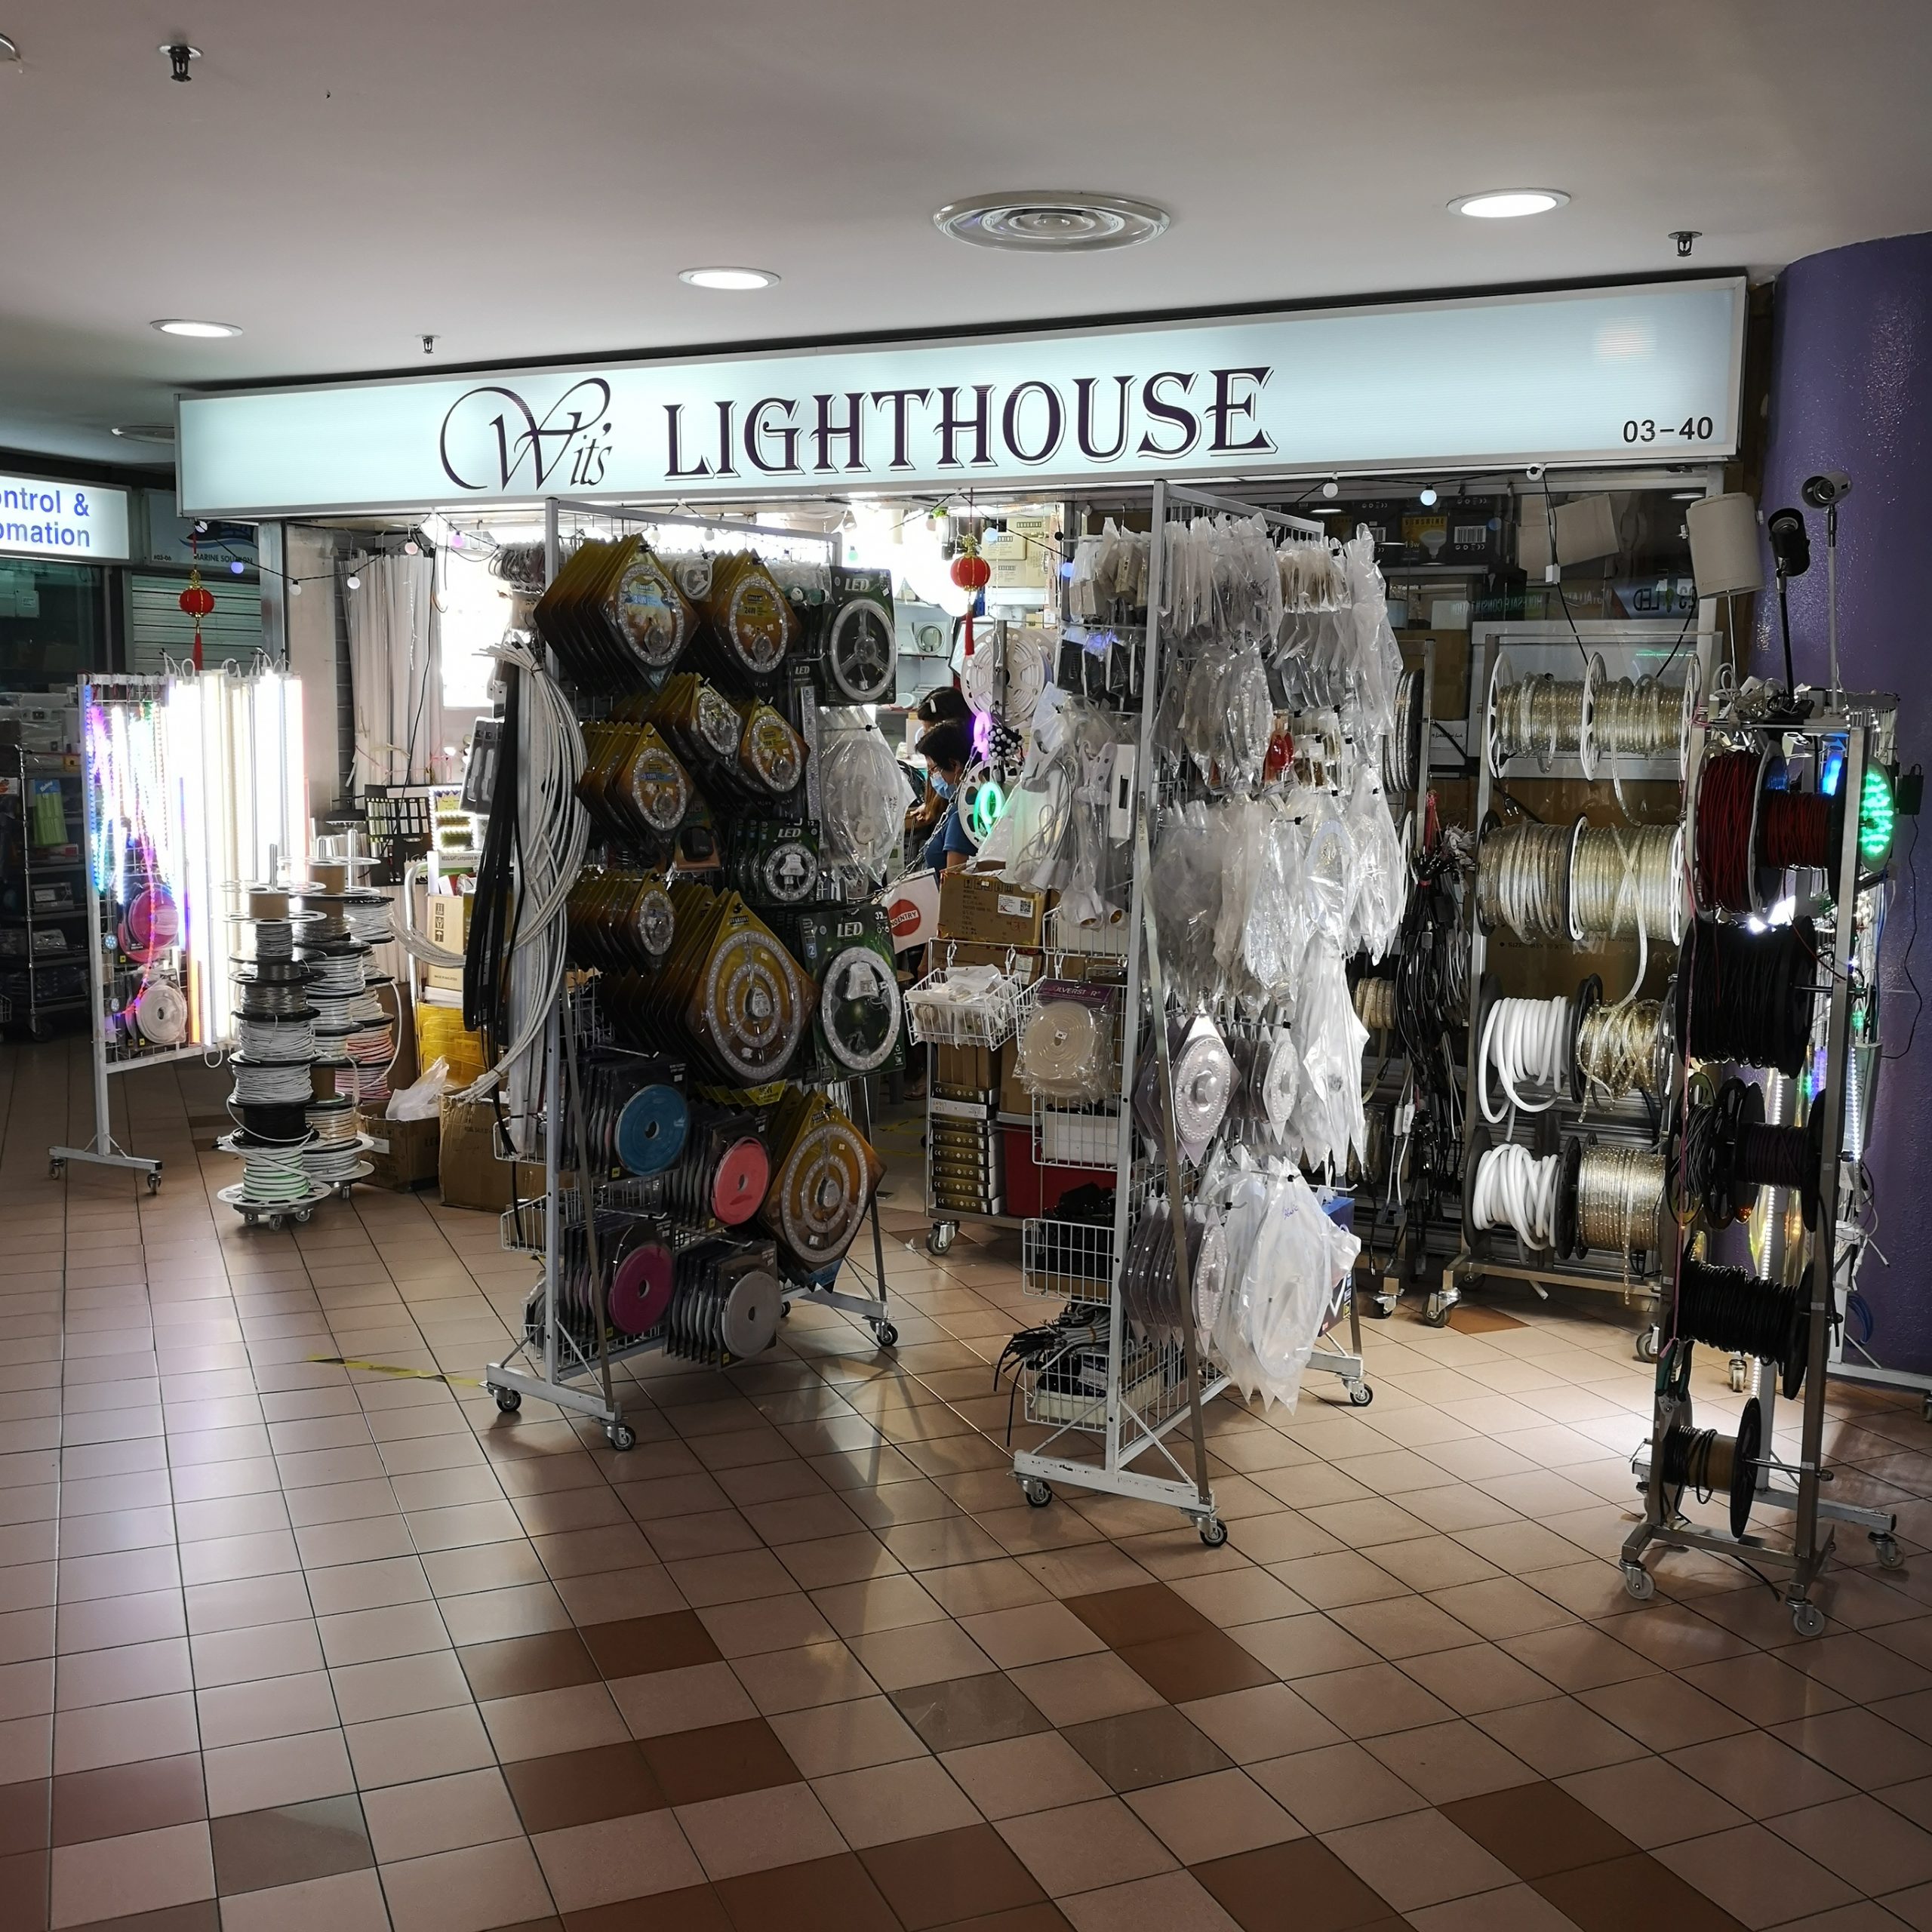 Wit's Lighthouse Old Shop Front